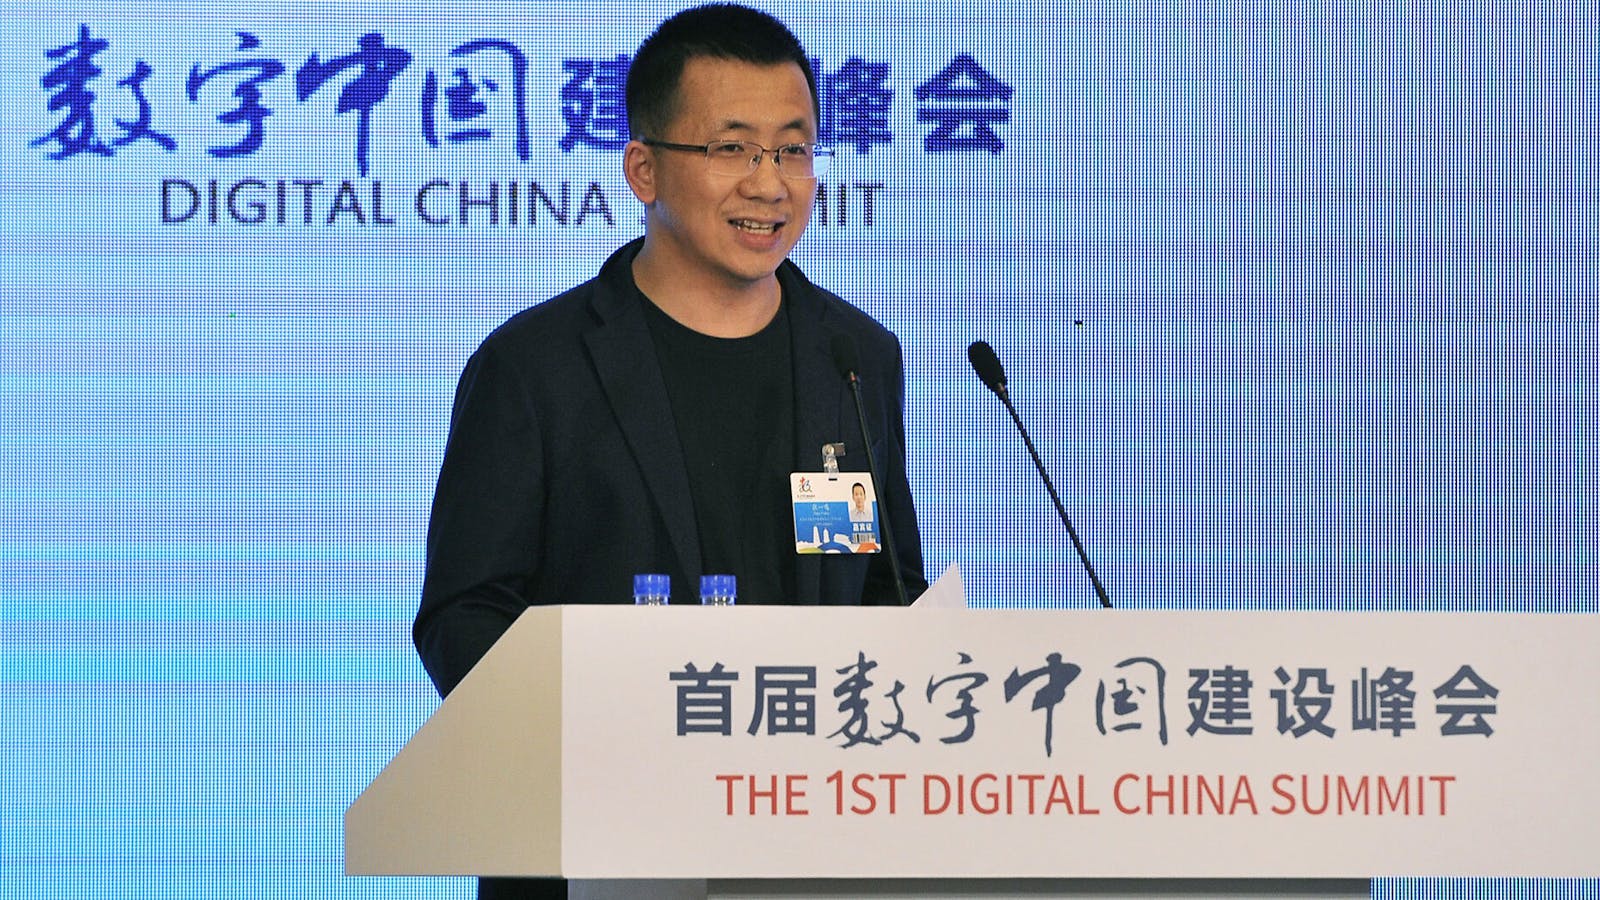 ByteDance founder Zhang Yiming. Photo by Getty